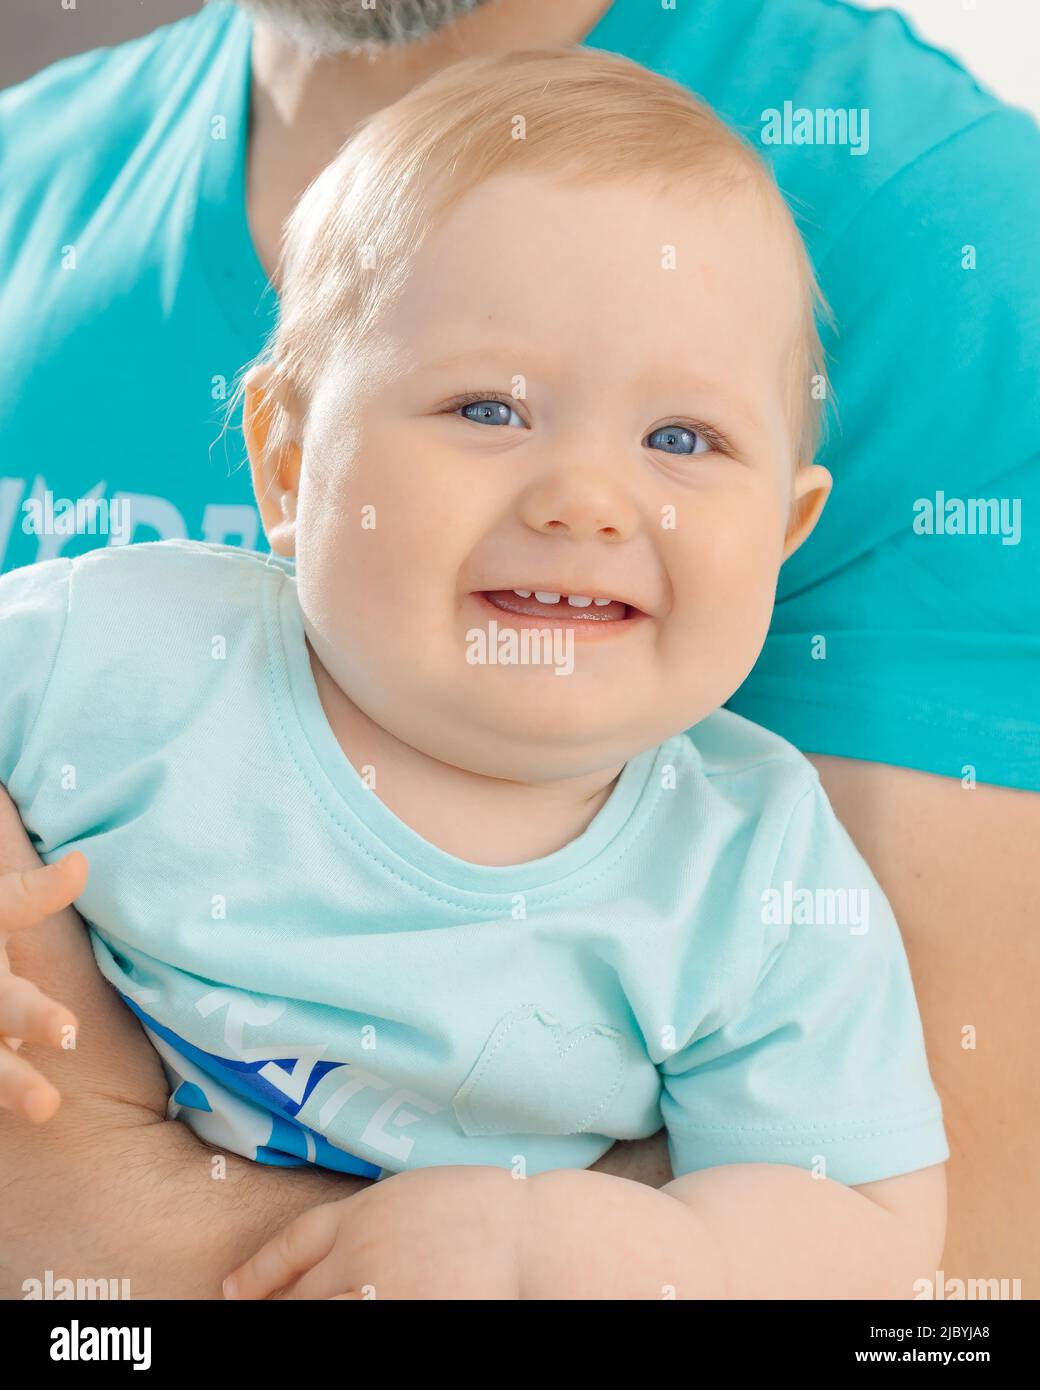 Portrait of family wearing blue T-shirts. Little smiling blue-eyed baby toddler child with fair hair sitting on man. Stock Photo